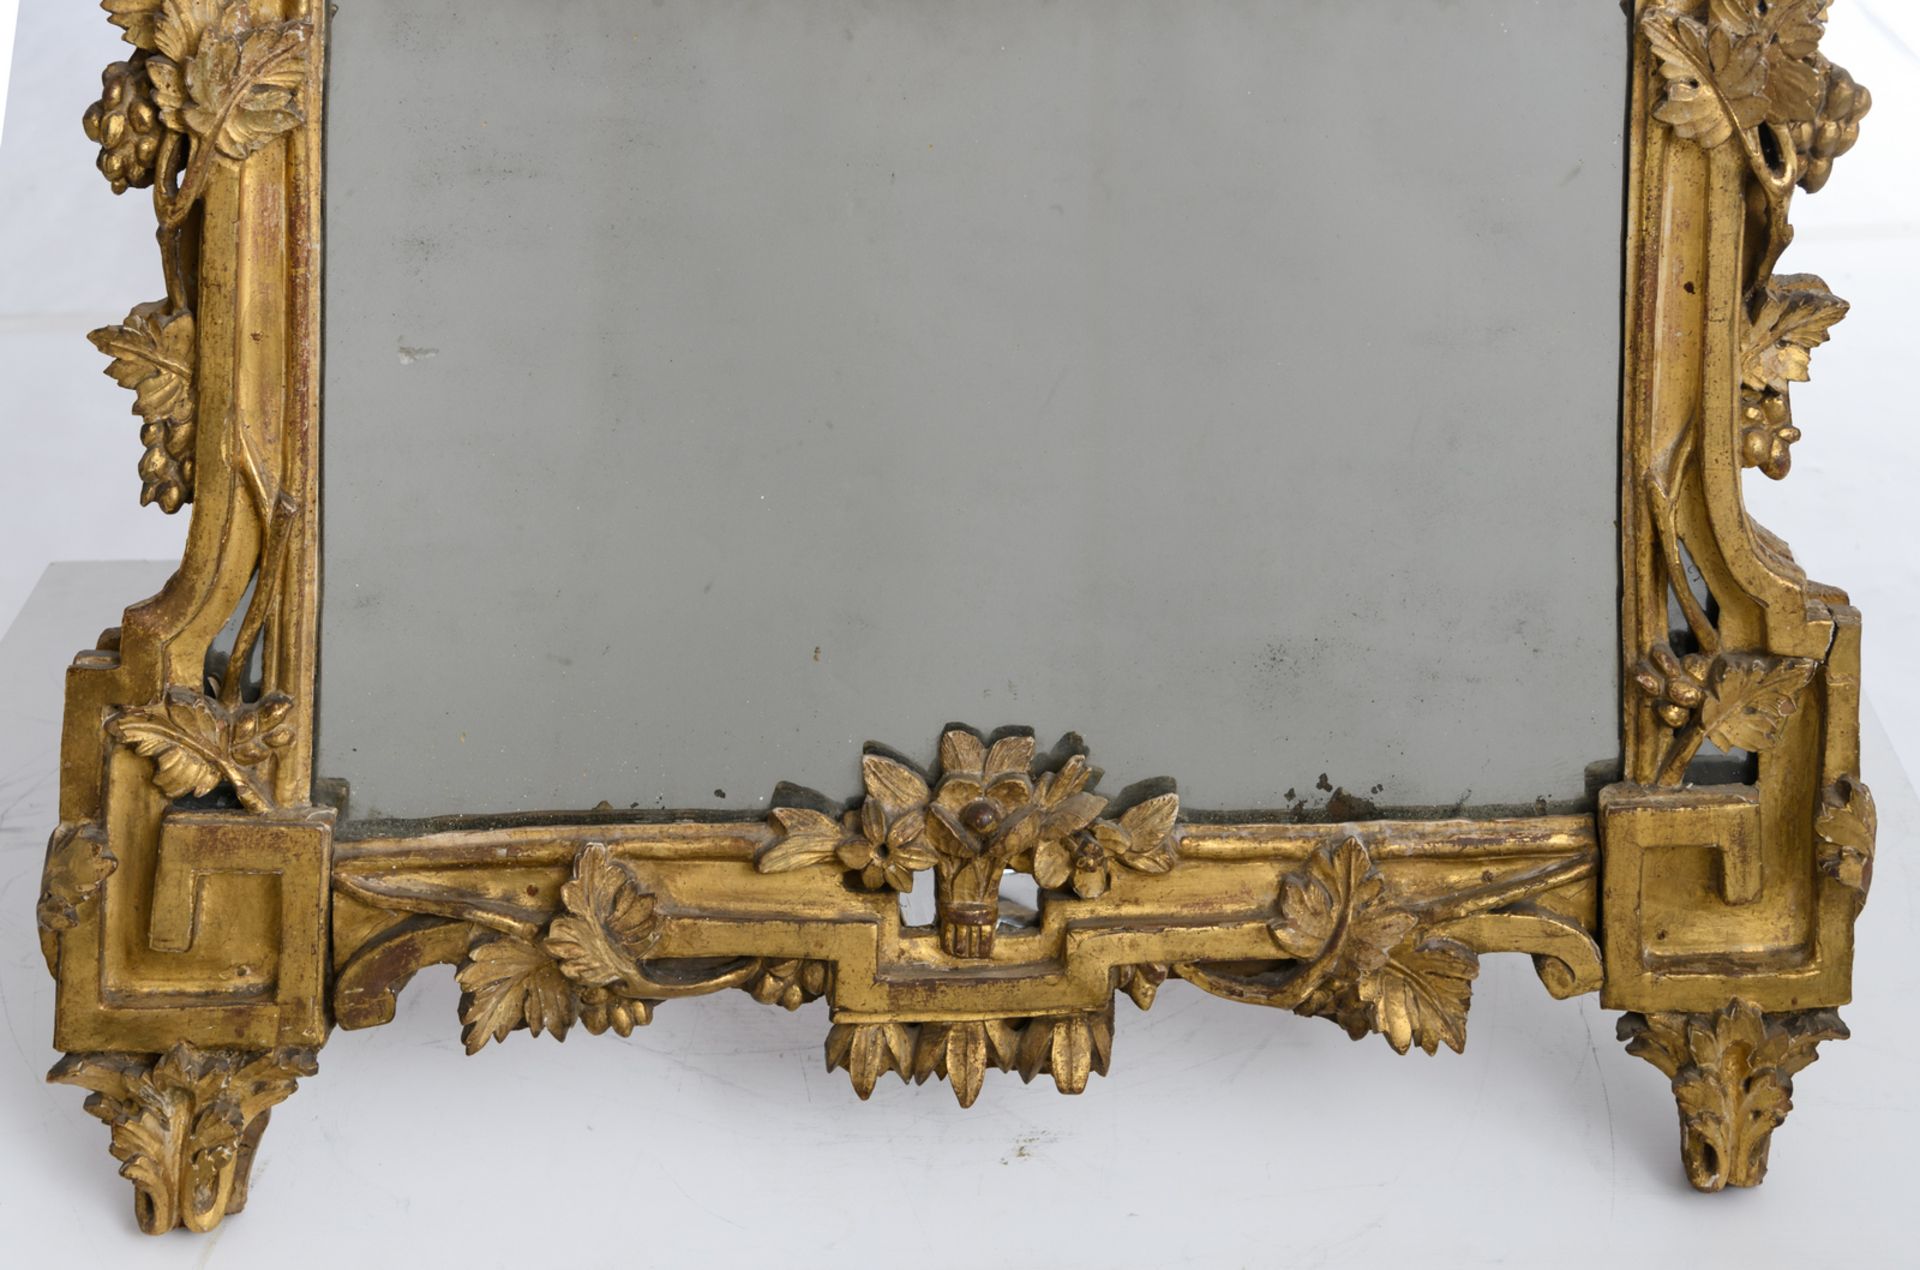 A mirror in a carved and gilt wooden Neoclassical 18thC frame, H 120,5 - W 73 cm - Image 4 of 4